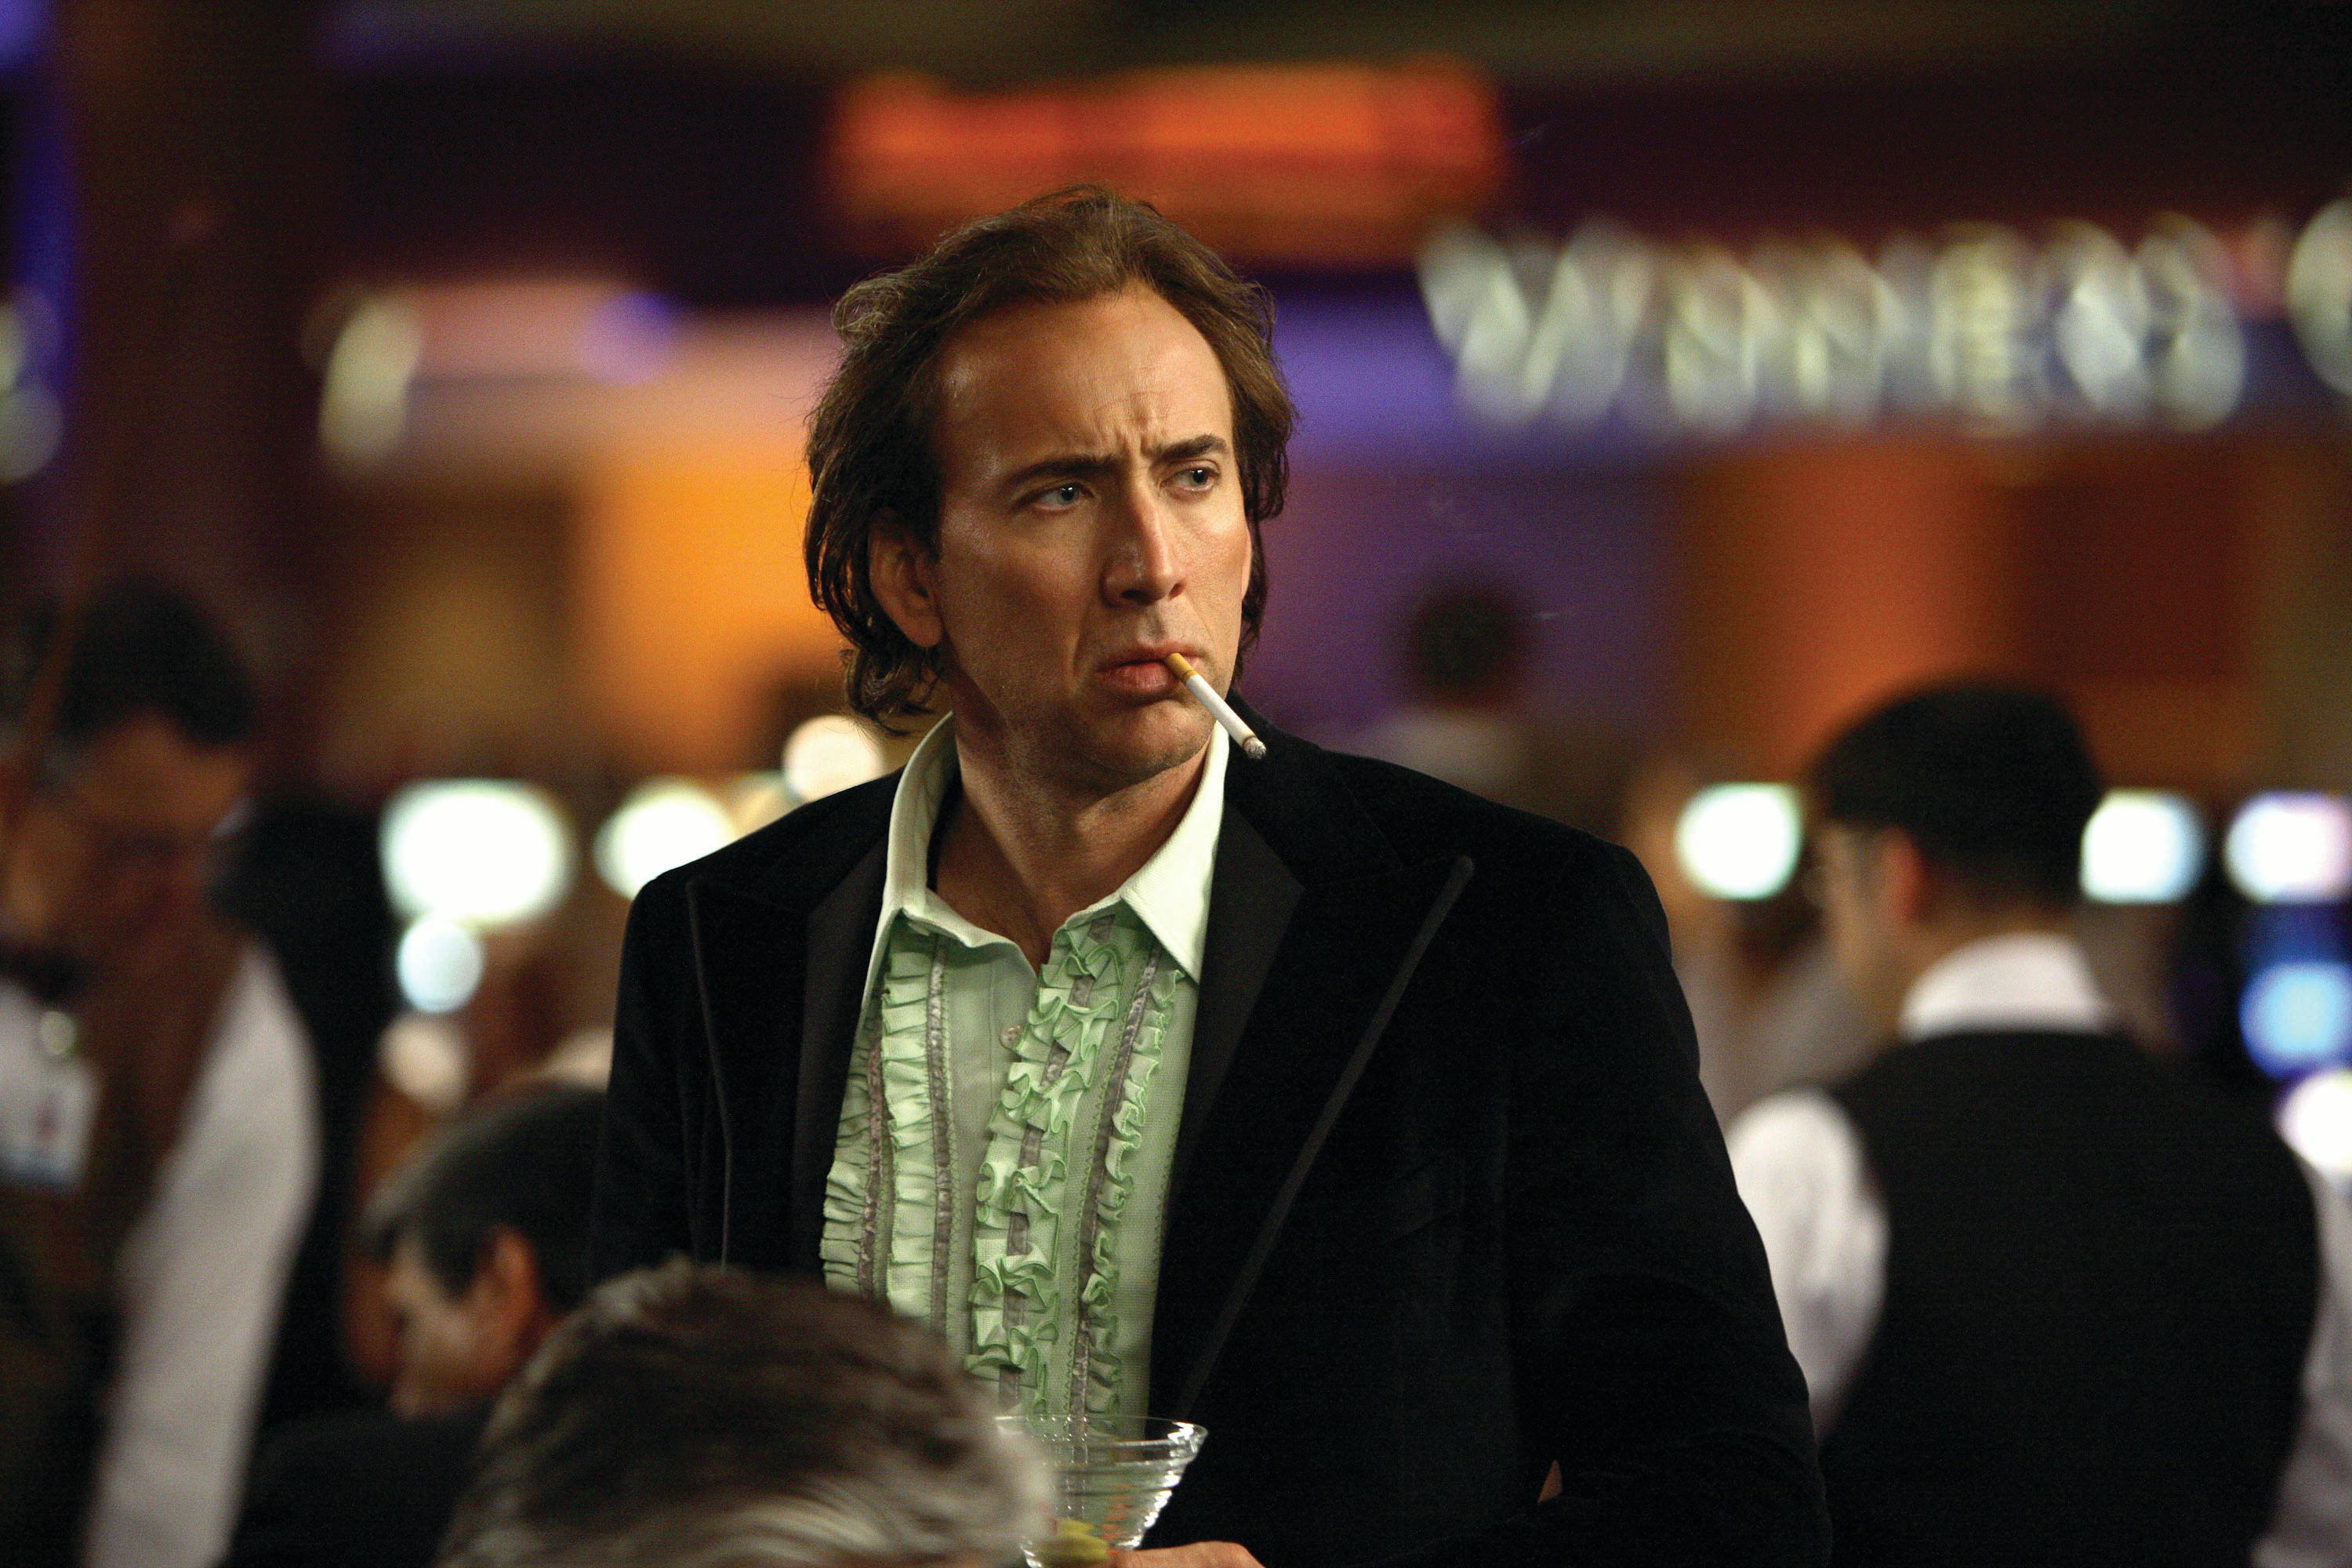 Nicolas Cage as a shabby Las Vegas magician with clairvoyant abilities in Next (2007)